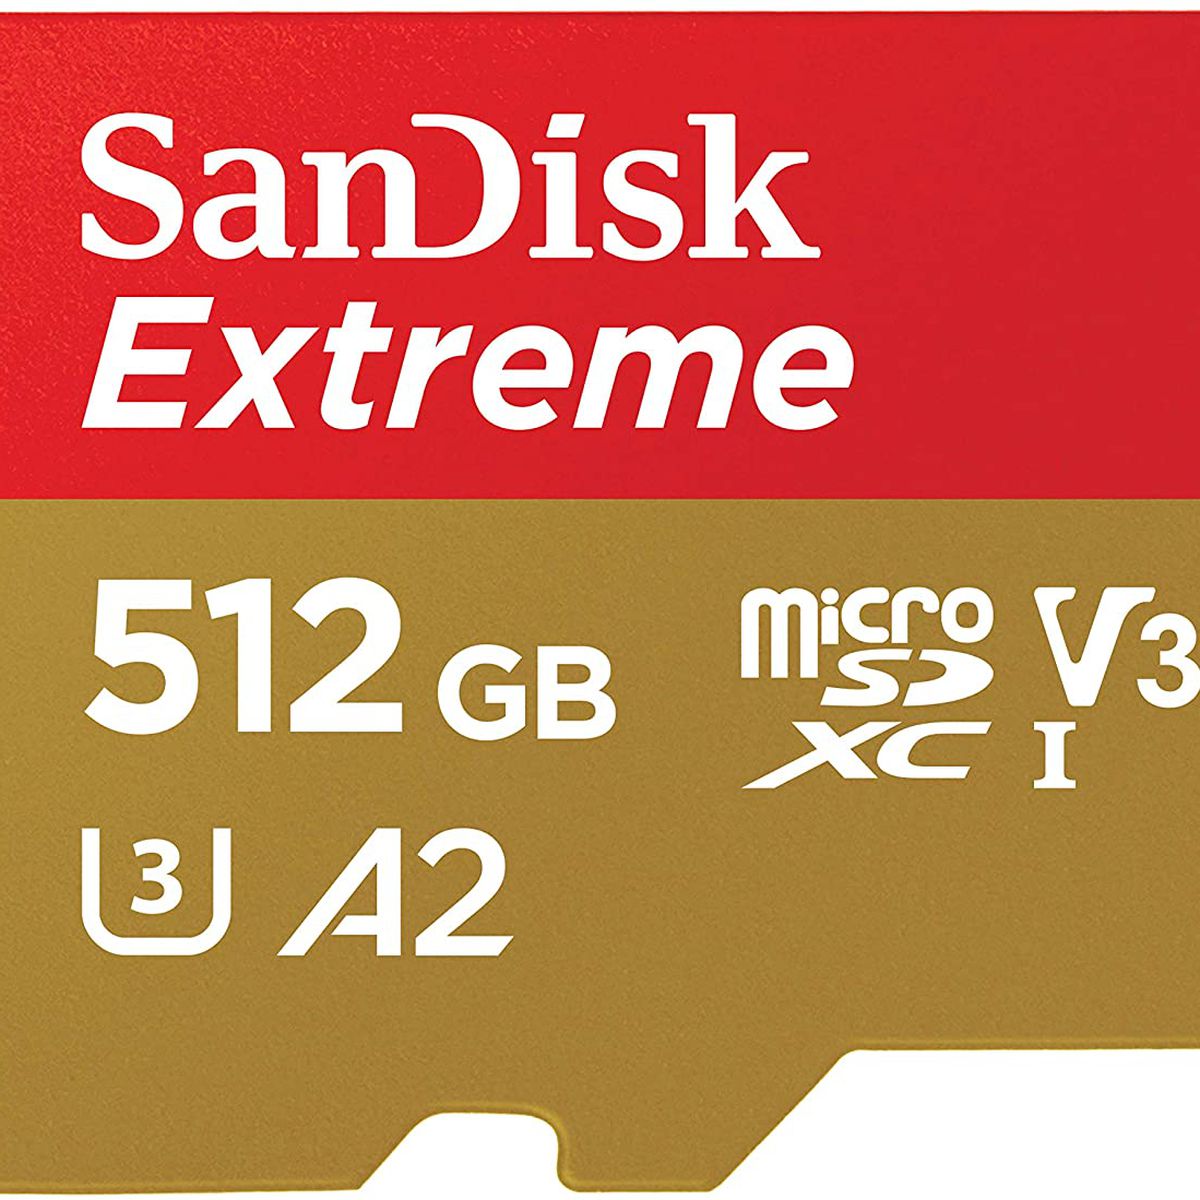 product shot of the SanDisk Extreme 512 GB microSD